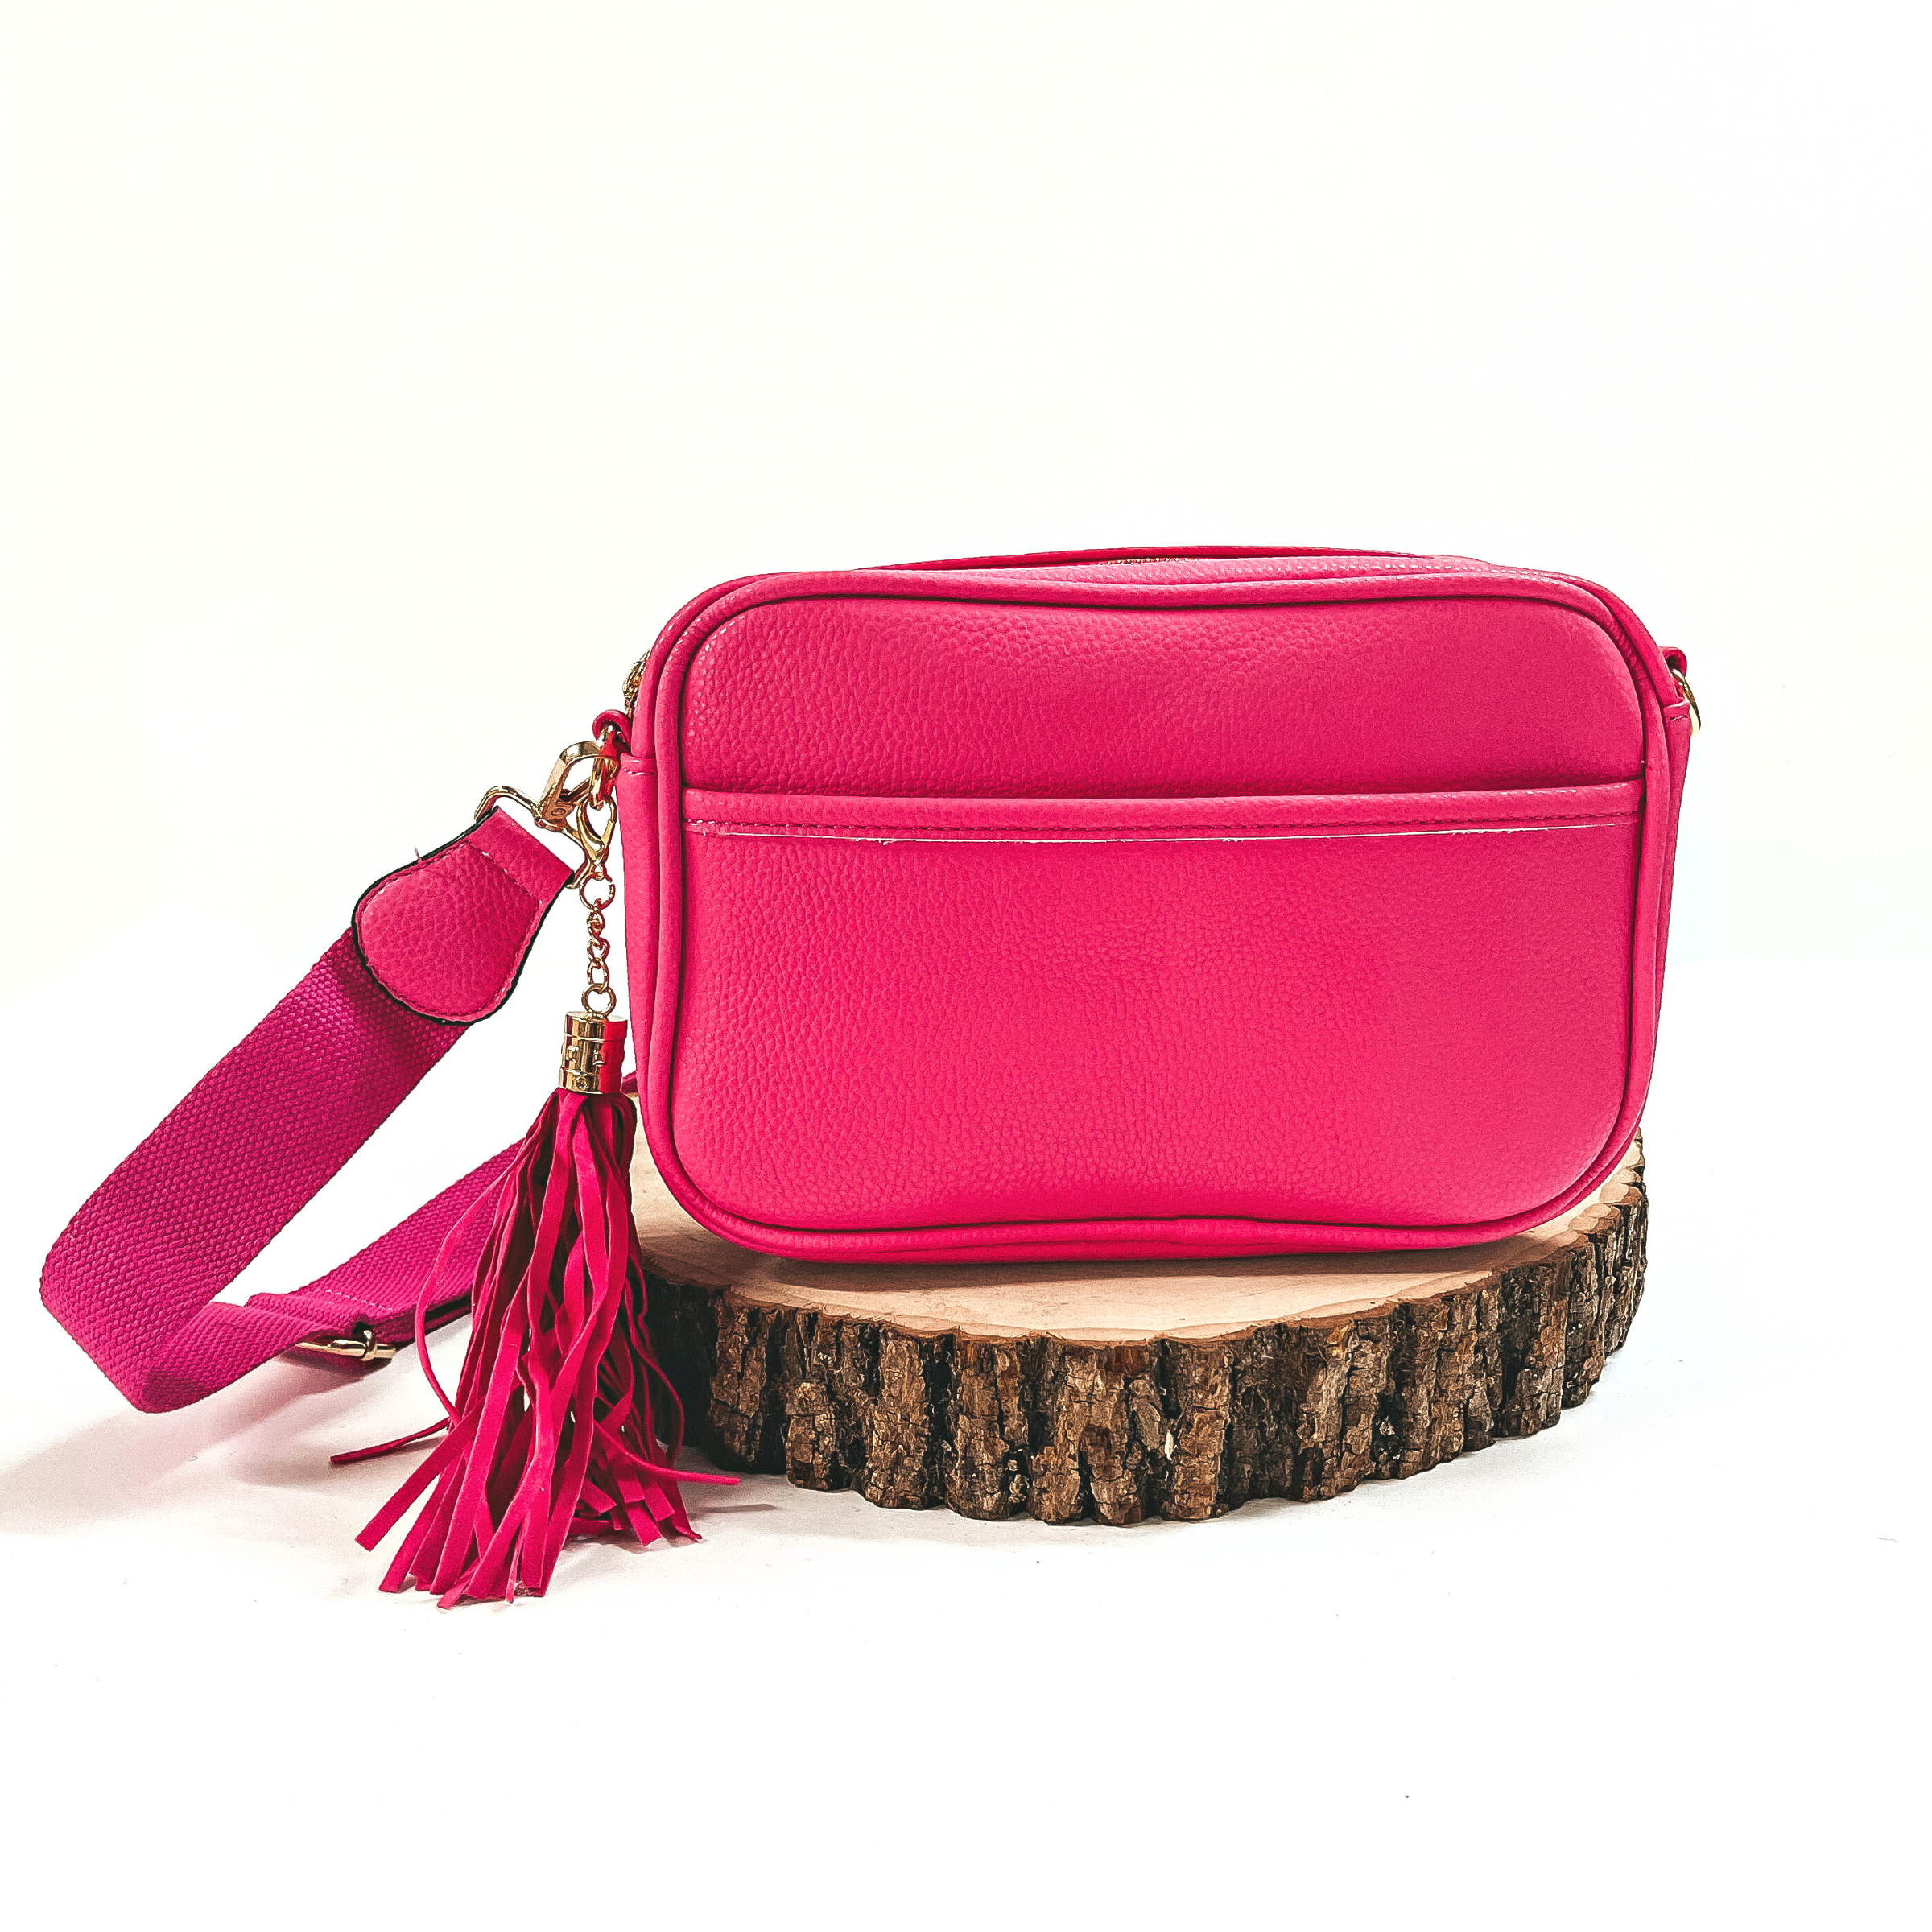 Lovin' Life Small Rectangle Crossbody Purse in Fuchsia - Giddy Up Glamour Boutique